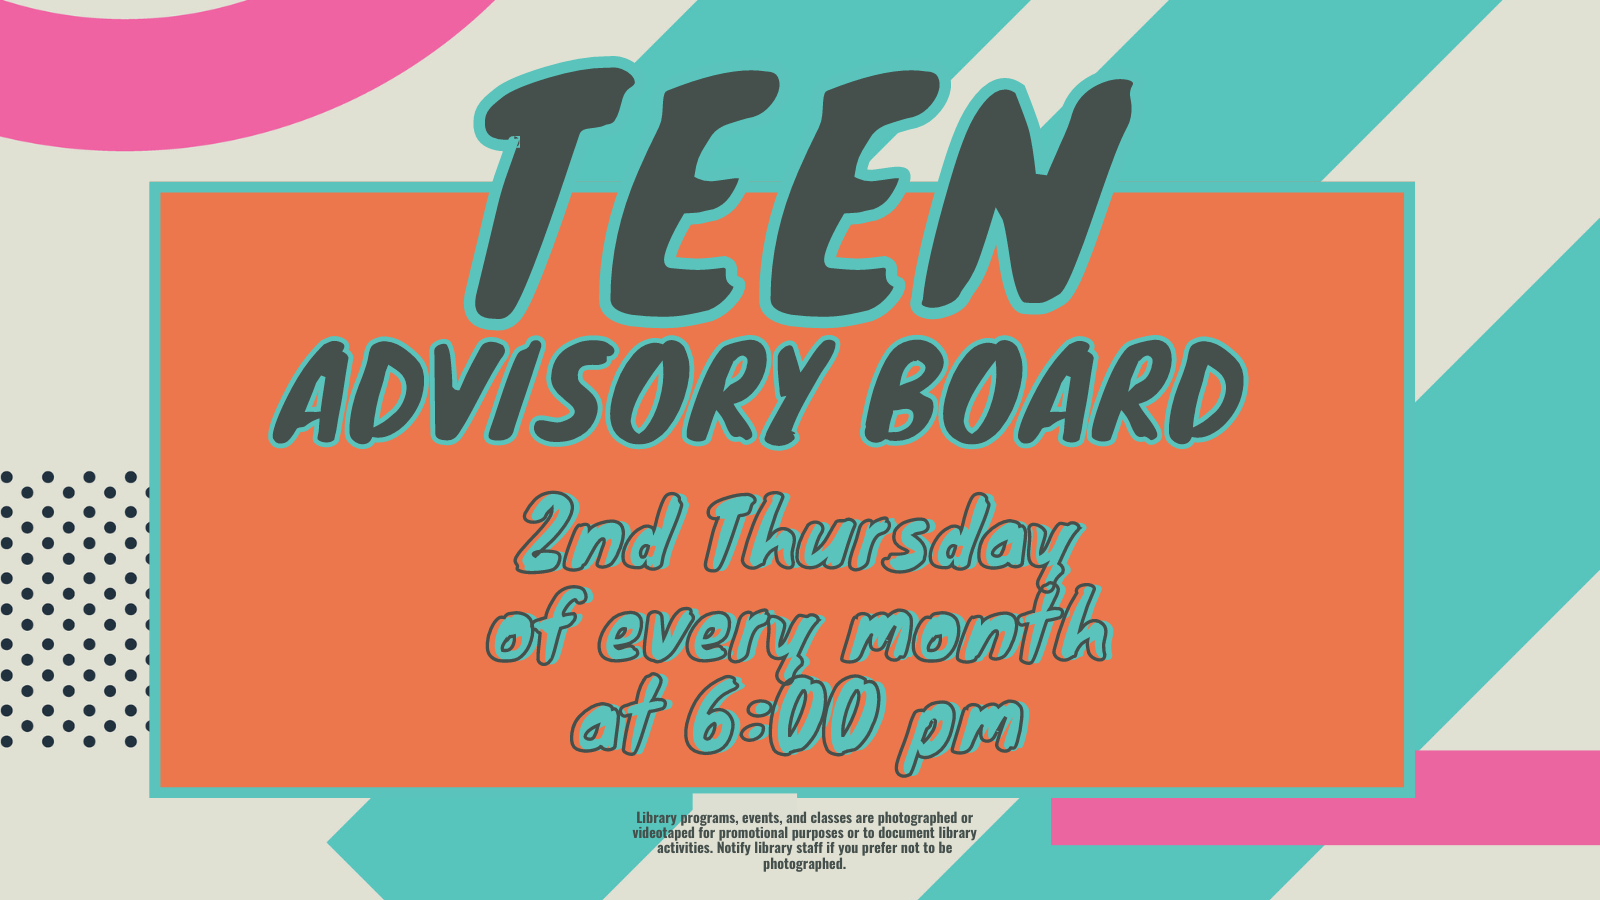 Teen advisory board: Second Thursday of every month at 6:00 pm